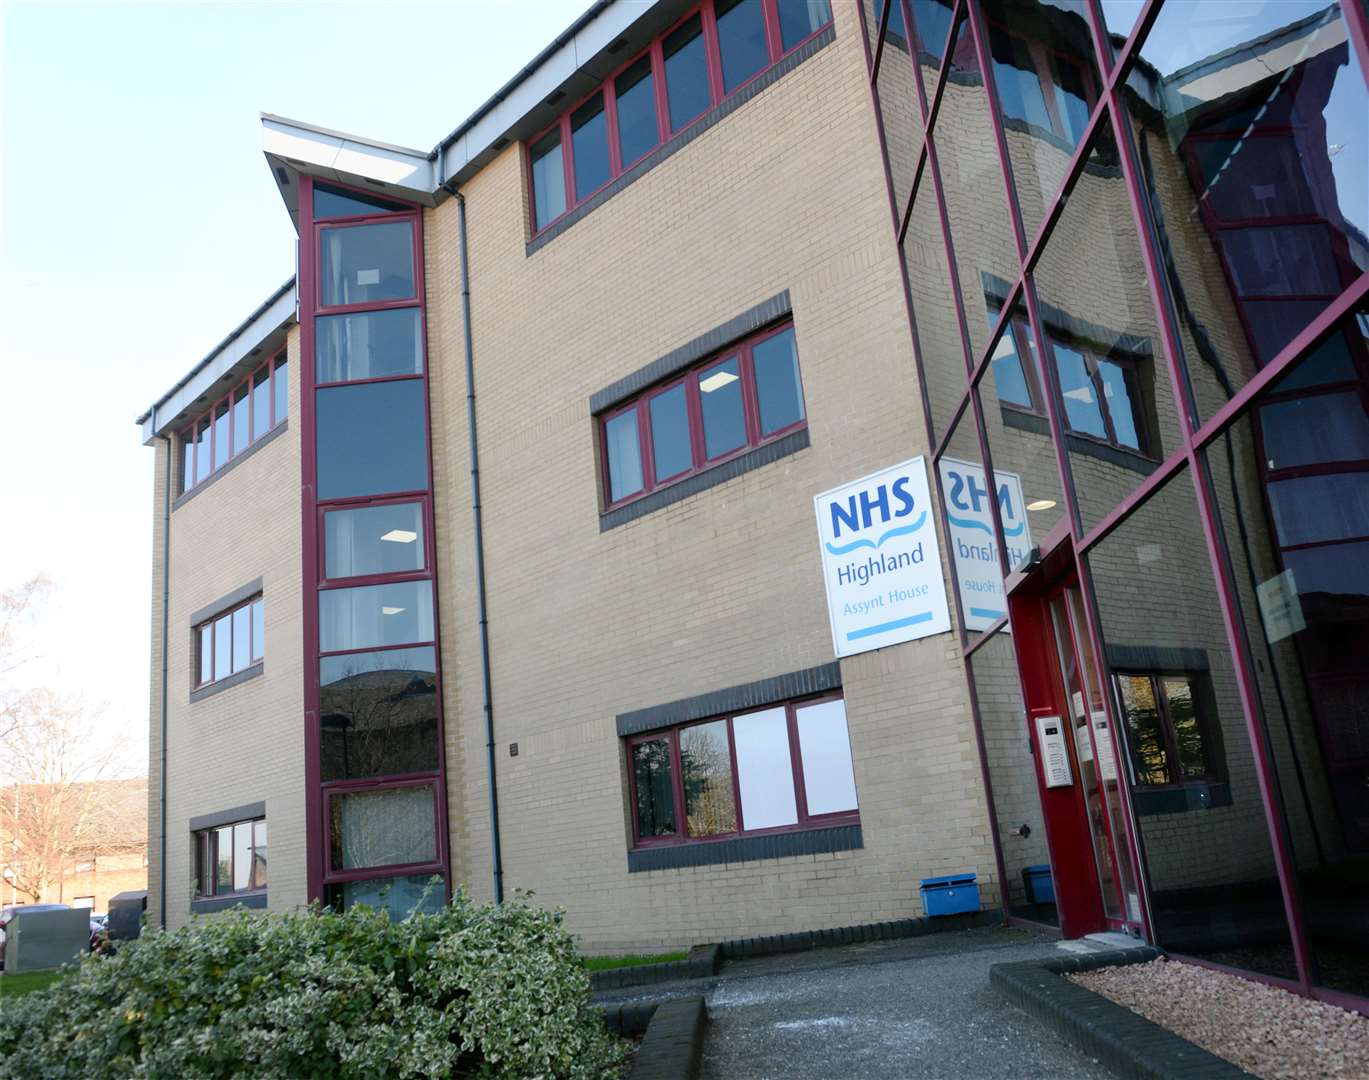 NHS Highland said it fully accepted the recommendations in the report from the Scottish Public Services Ombudsman.